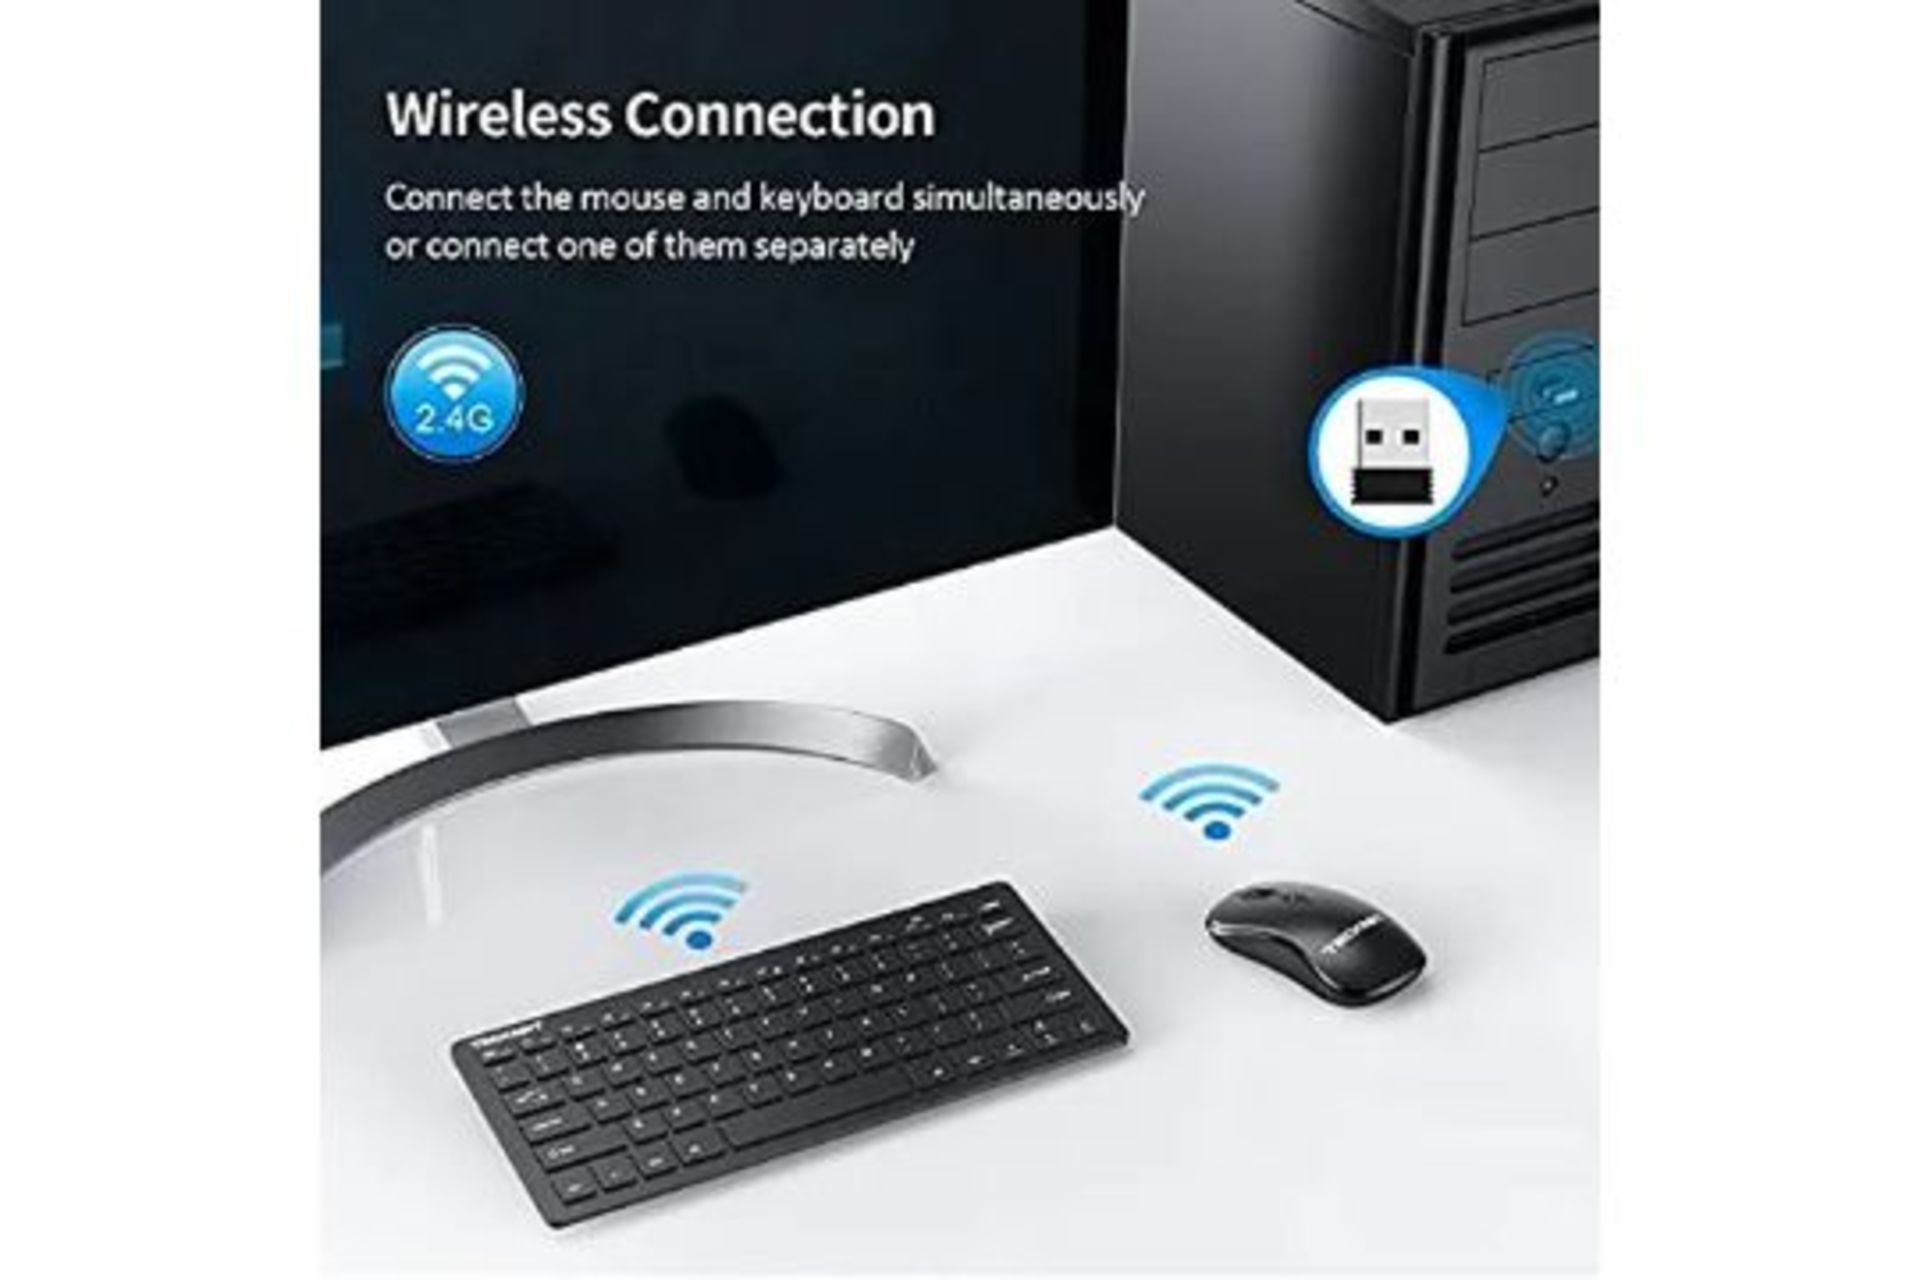 Two sets of Tecknet Wireless keyboard and mouse Combo - board 28cm by 12cm approx.